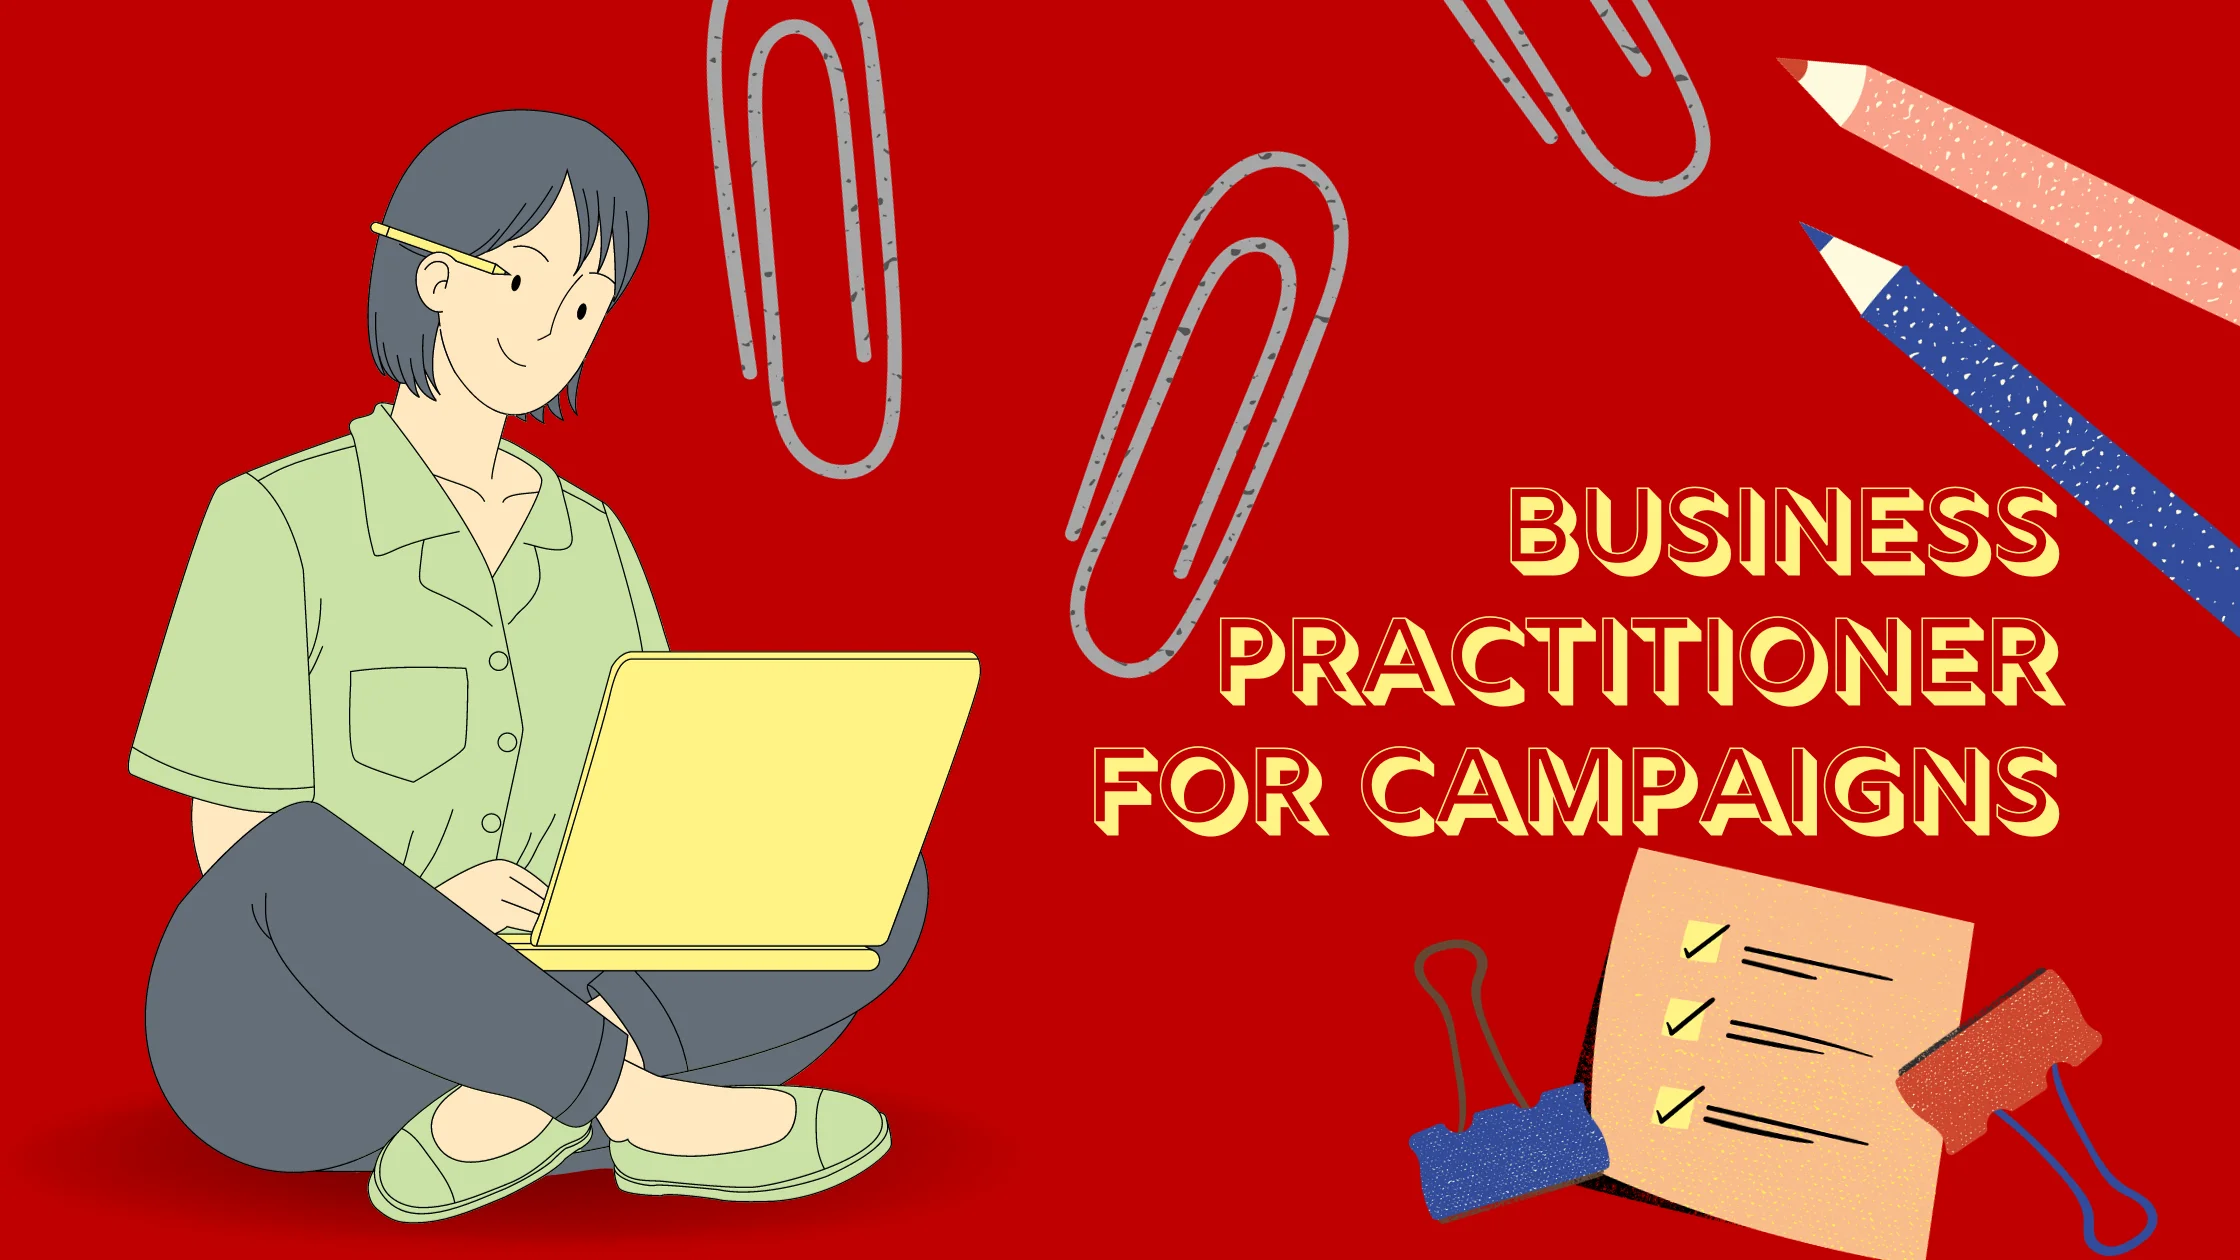 Business Practitioner for Campaigns success